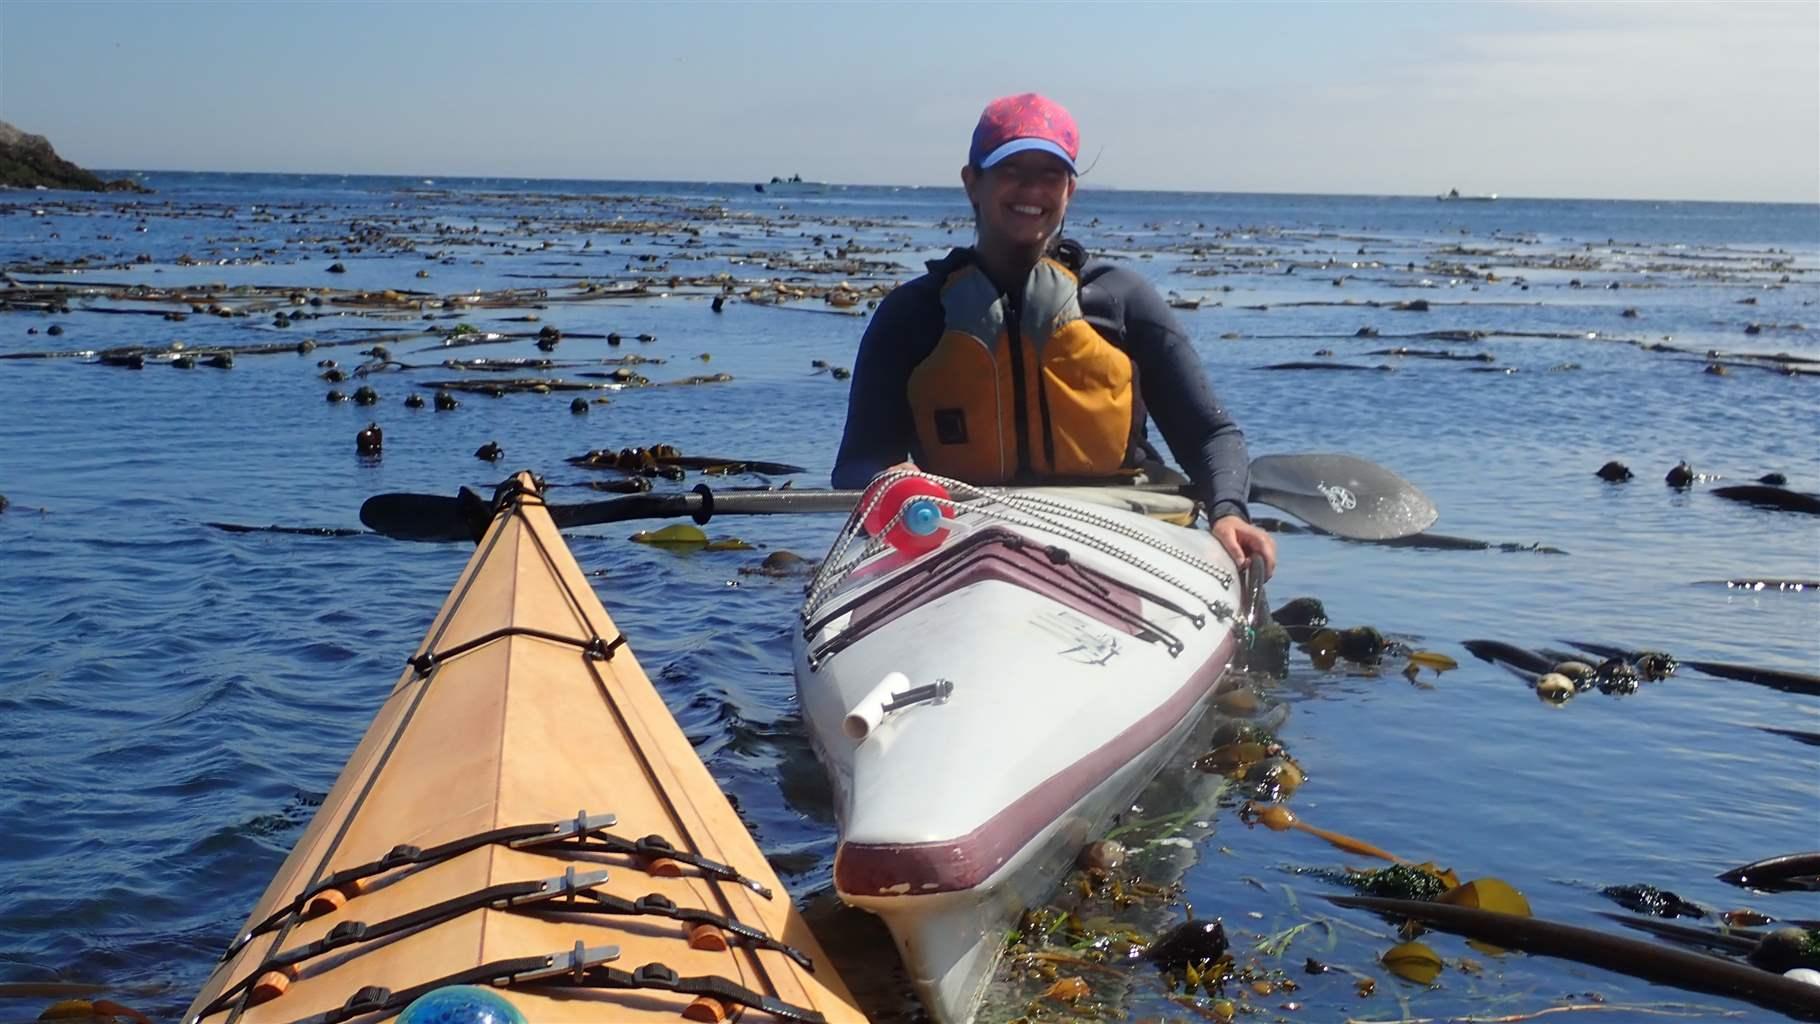 A kayaker drifts through across the water speckled with eelgrass as far as the eye can see.